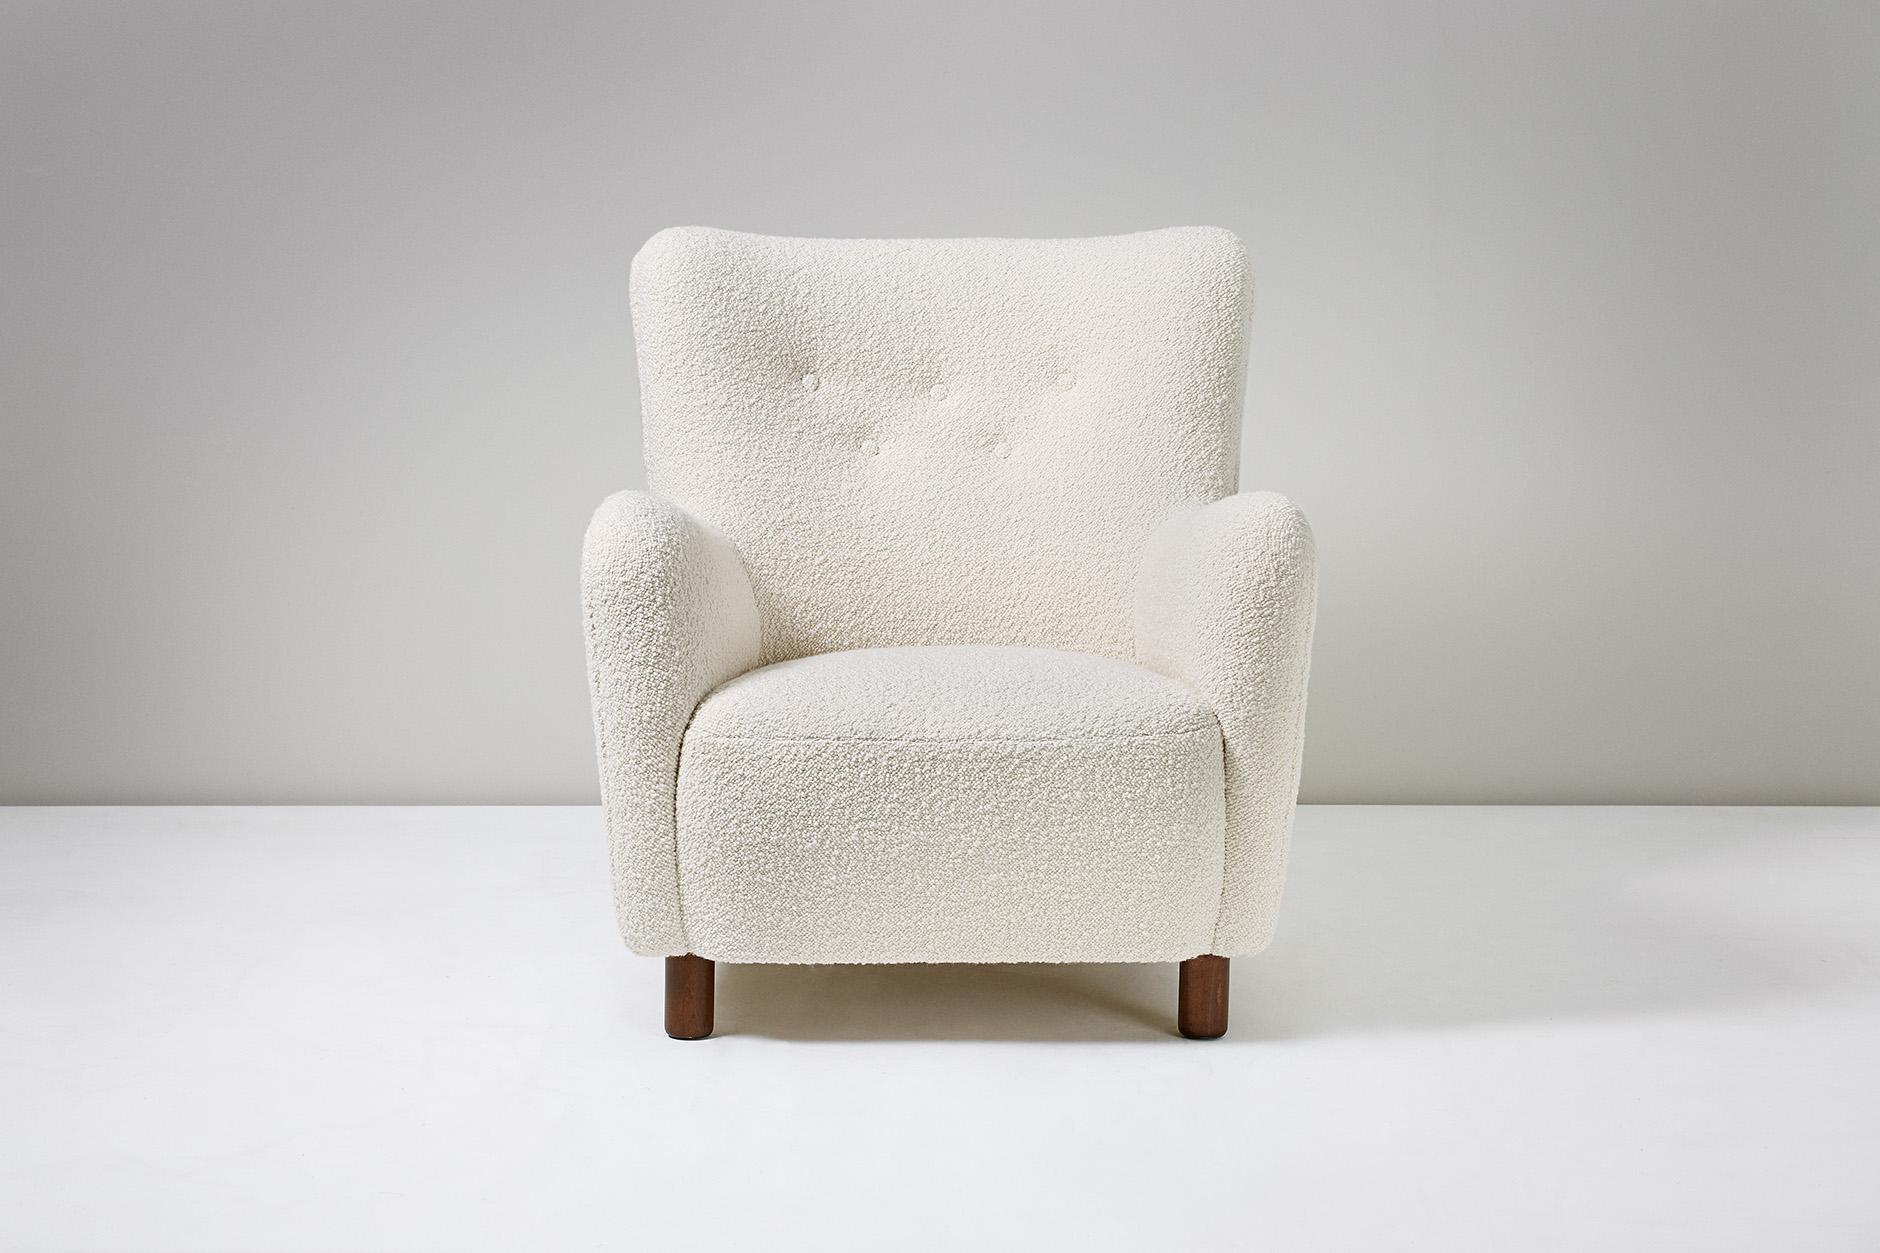 Fritz Hansen Style Armchair

Armchair, 1954

Armchair in the manner of Fritz Hansen, produced in Denmark by FDB Mobler. Stained beech legs with new Italian boucle wool fabric upholstery. 

Measures: H 73cm / D 68cm / W 69cm / SH 38cm.